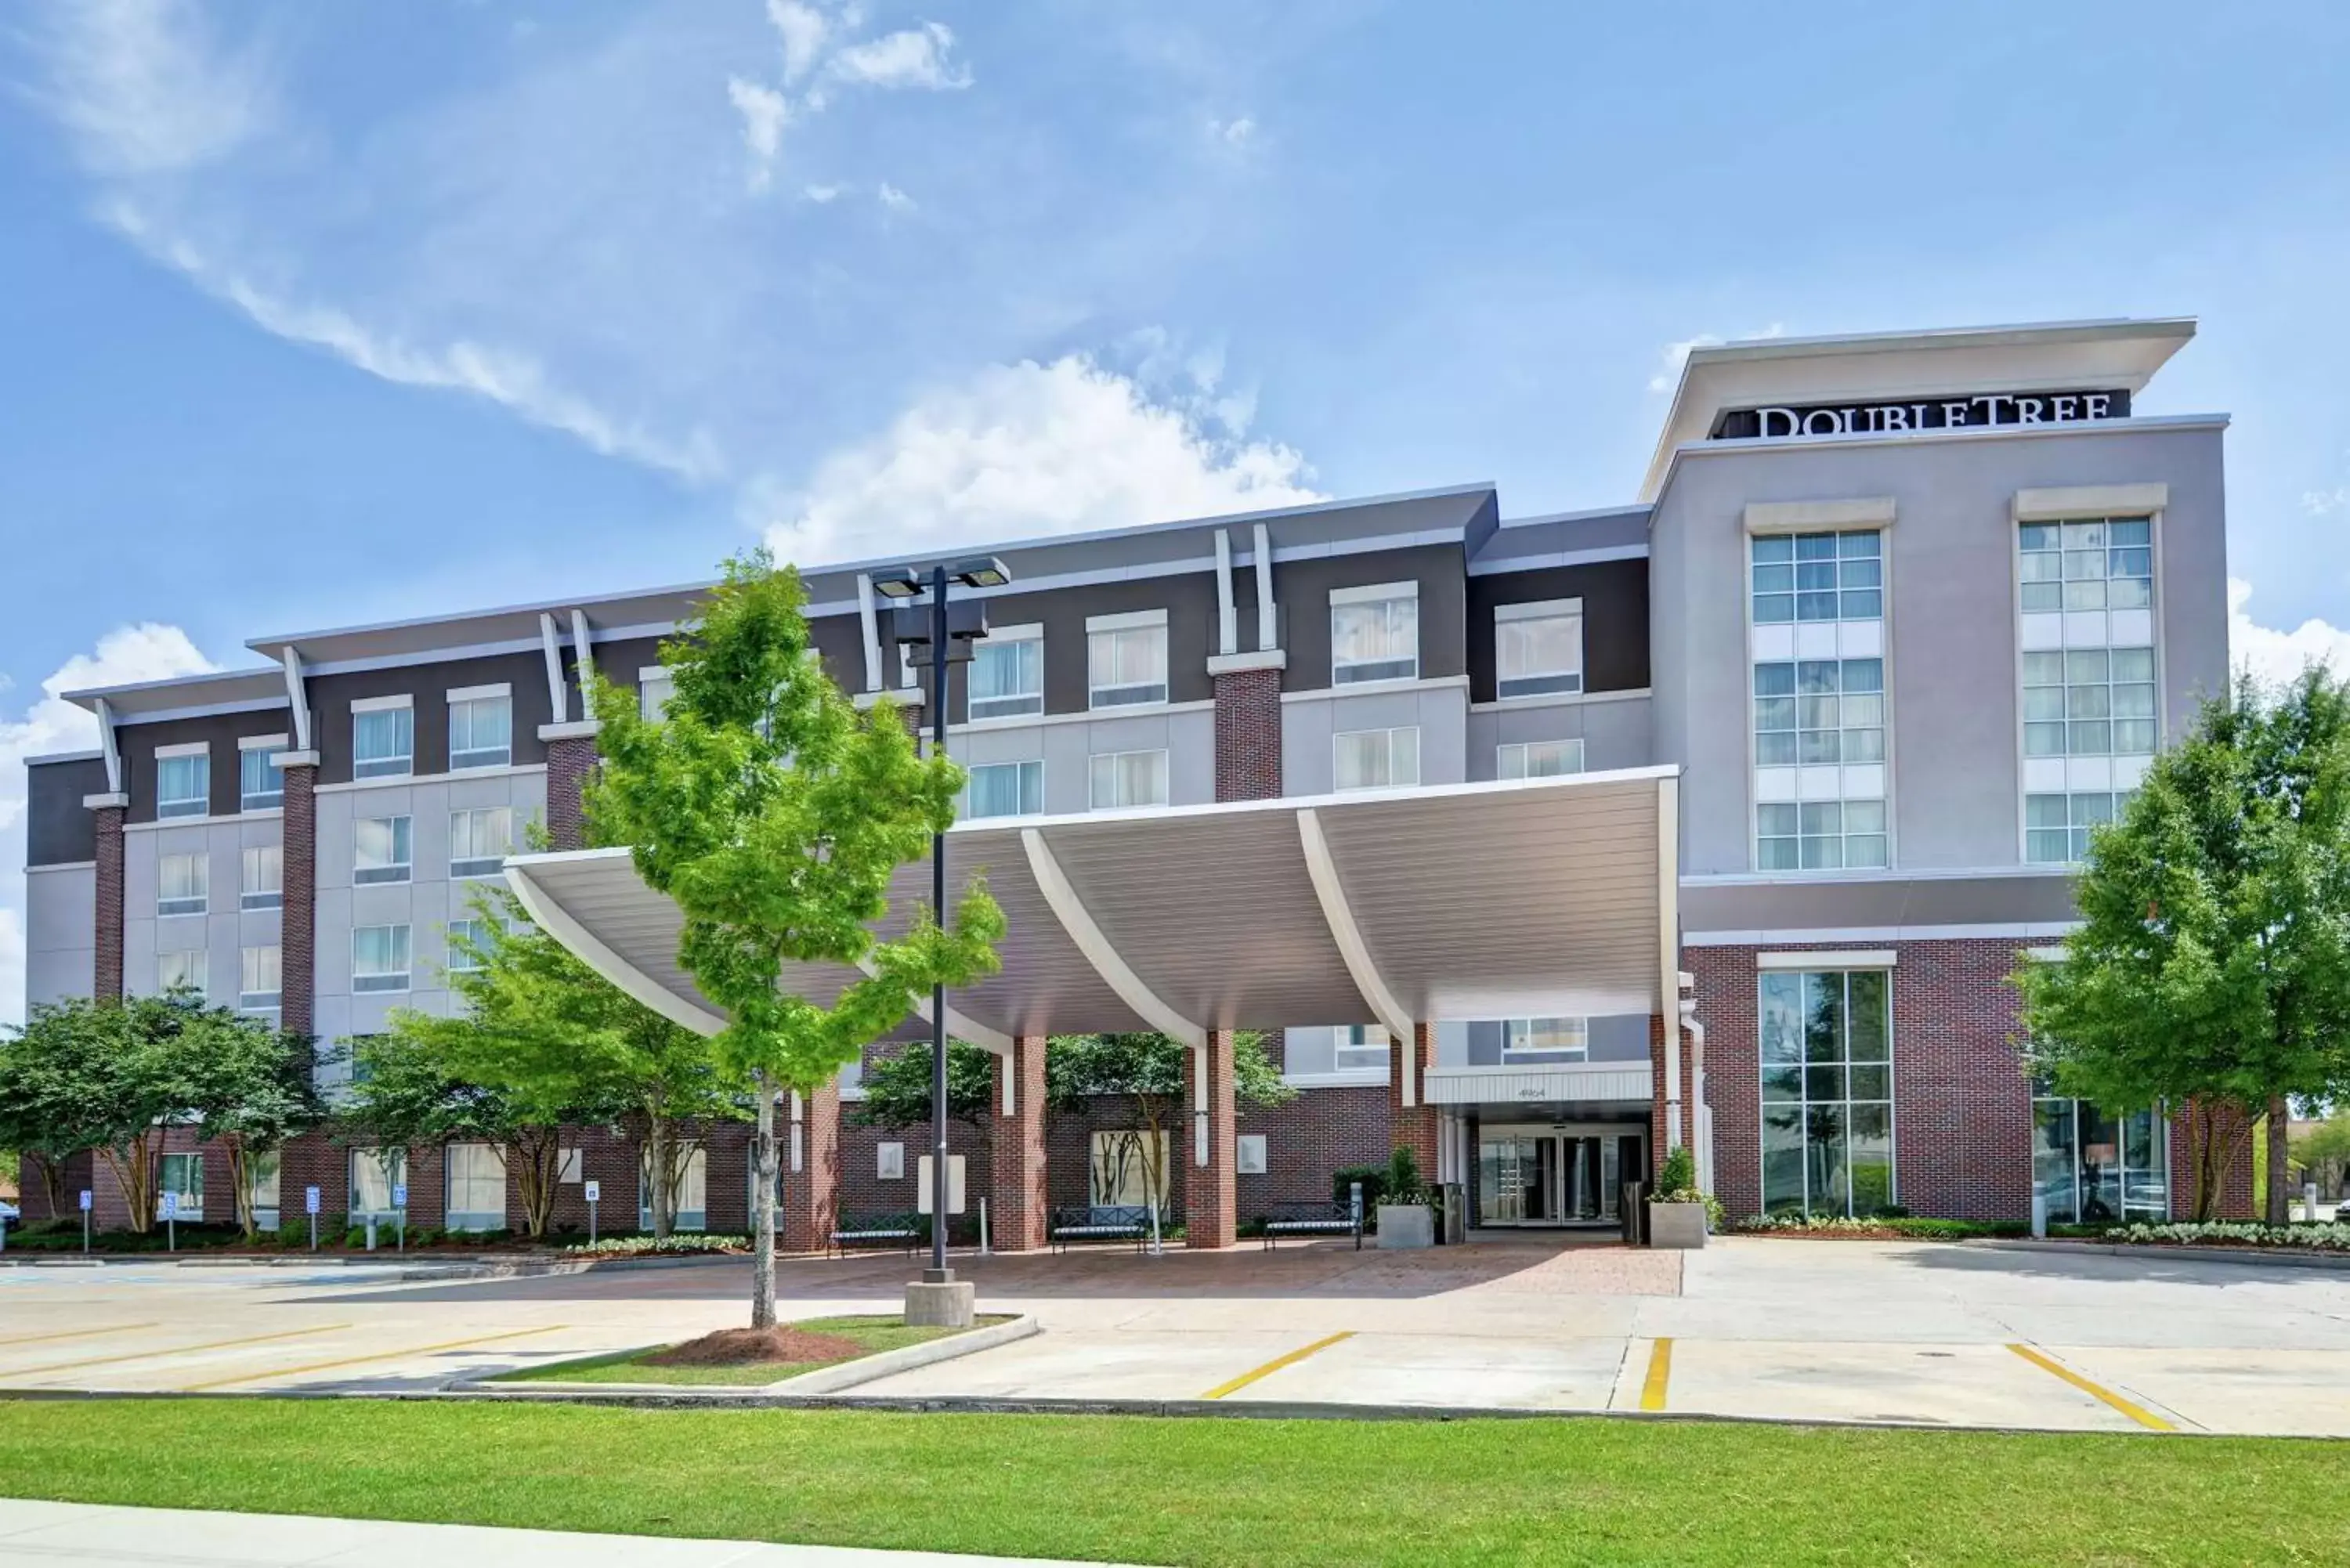 Property Building in DoubleTree by Hilton Baton Rouge